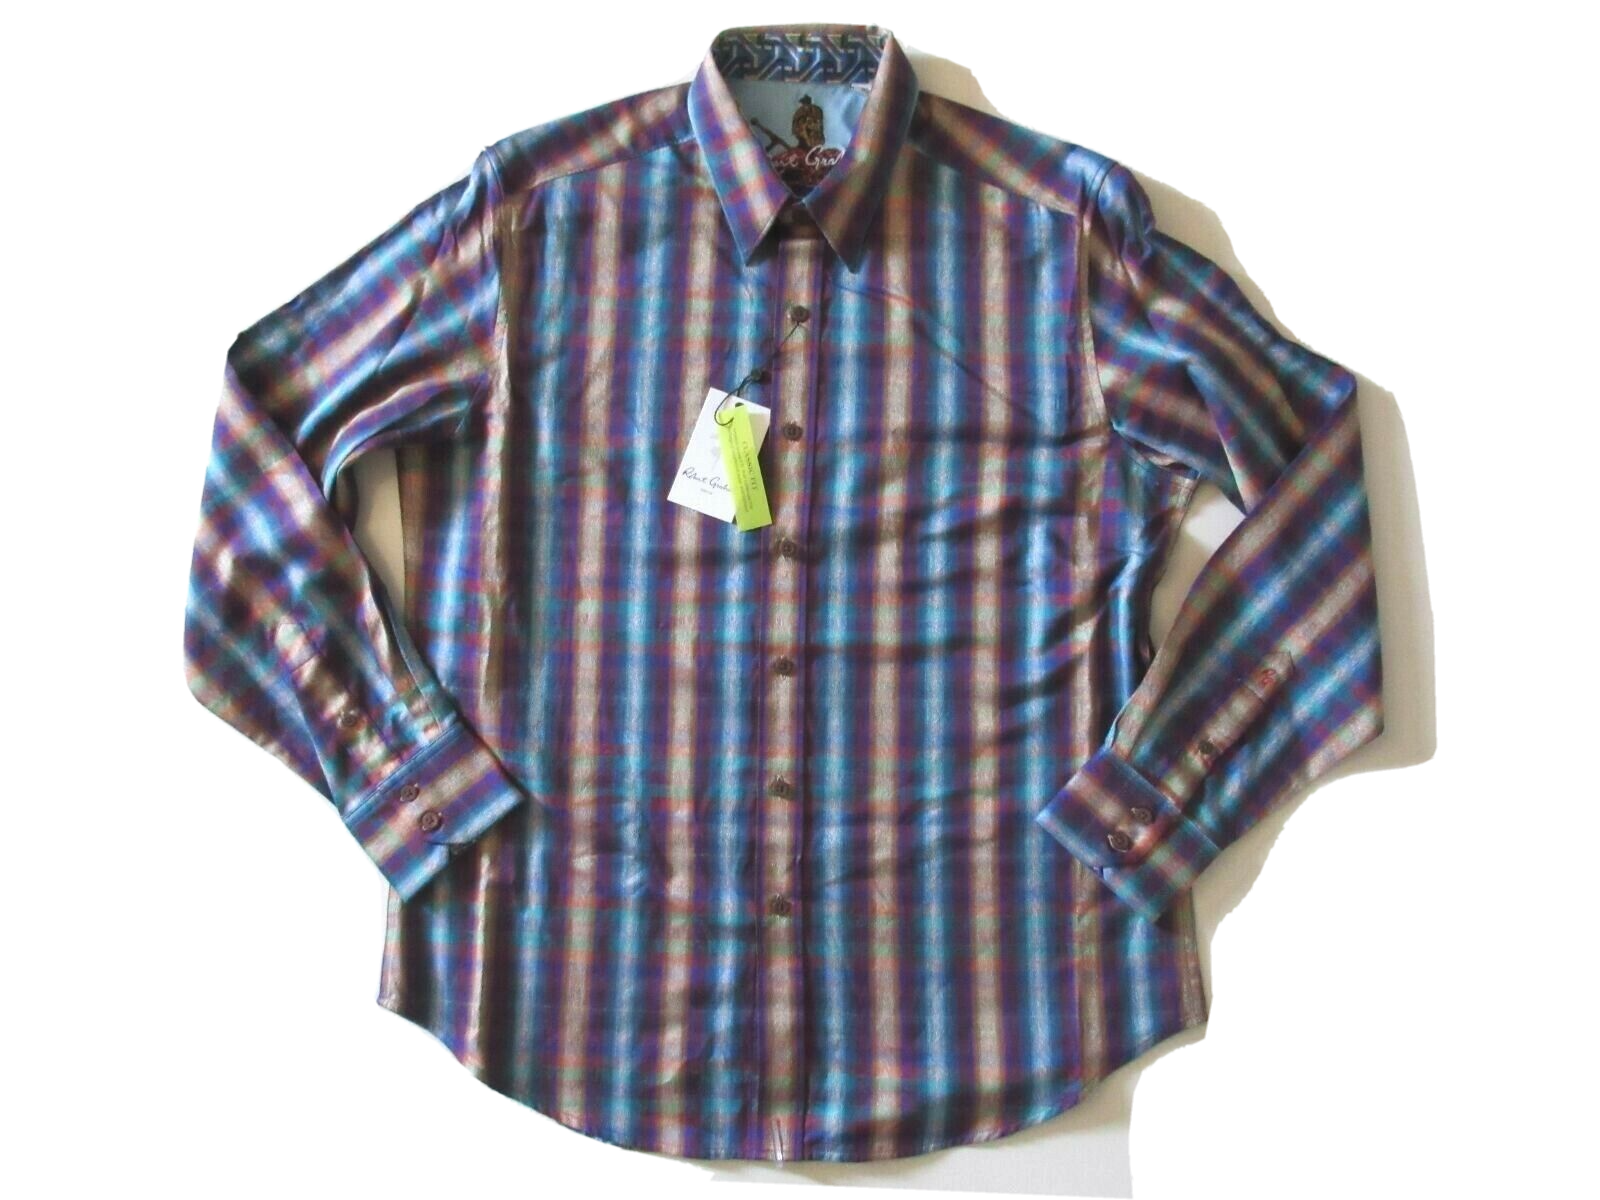 Primary image for NWT Robert Graham Chiswick Plaid & Paisley Classic Fit Flip Cuff Shirt L $248